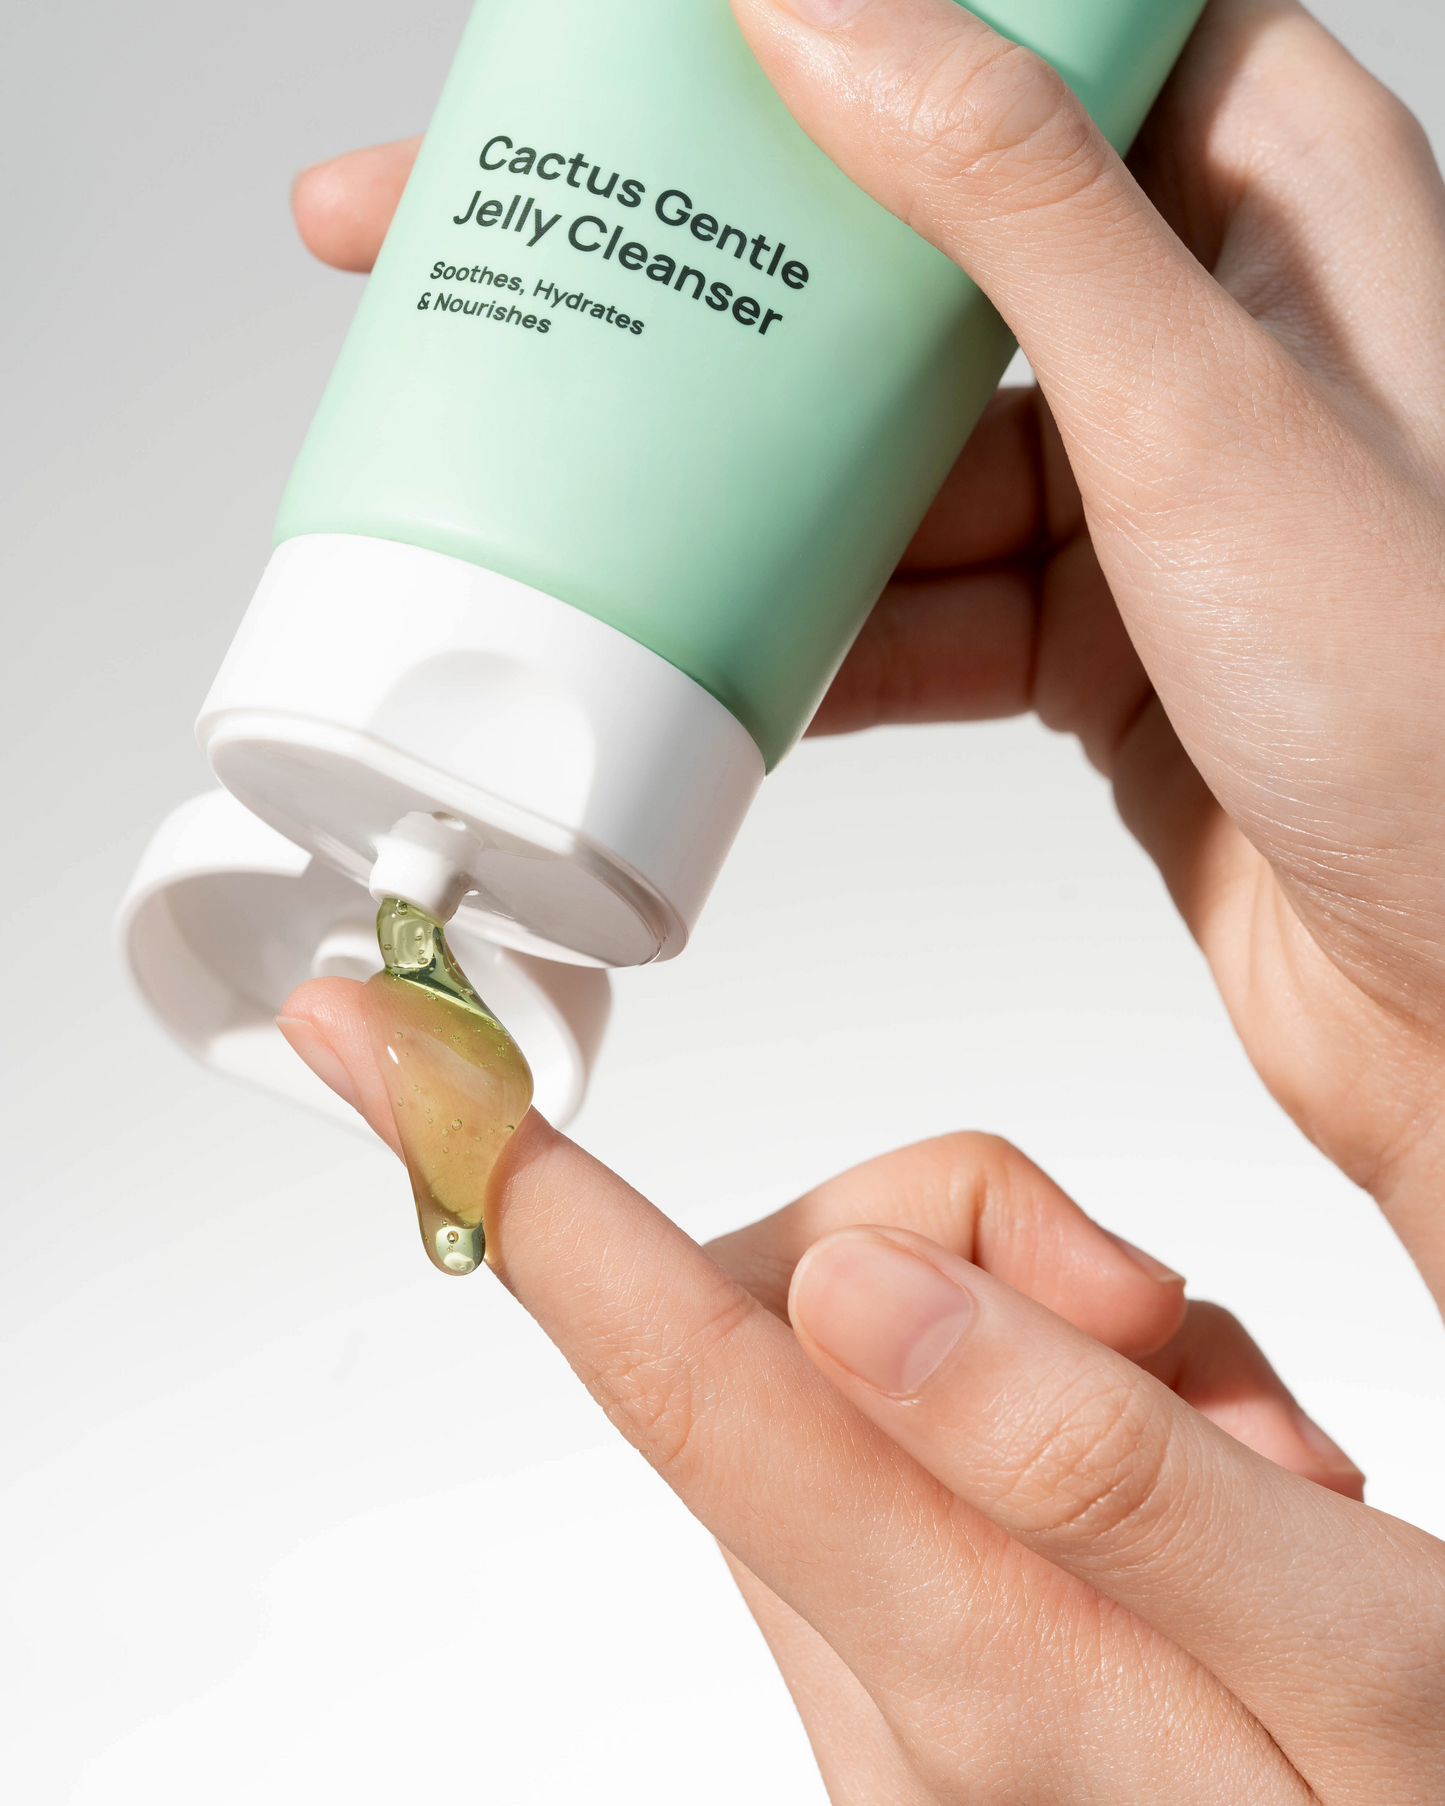 Cactus Gentle Jelly Cleanser